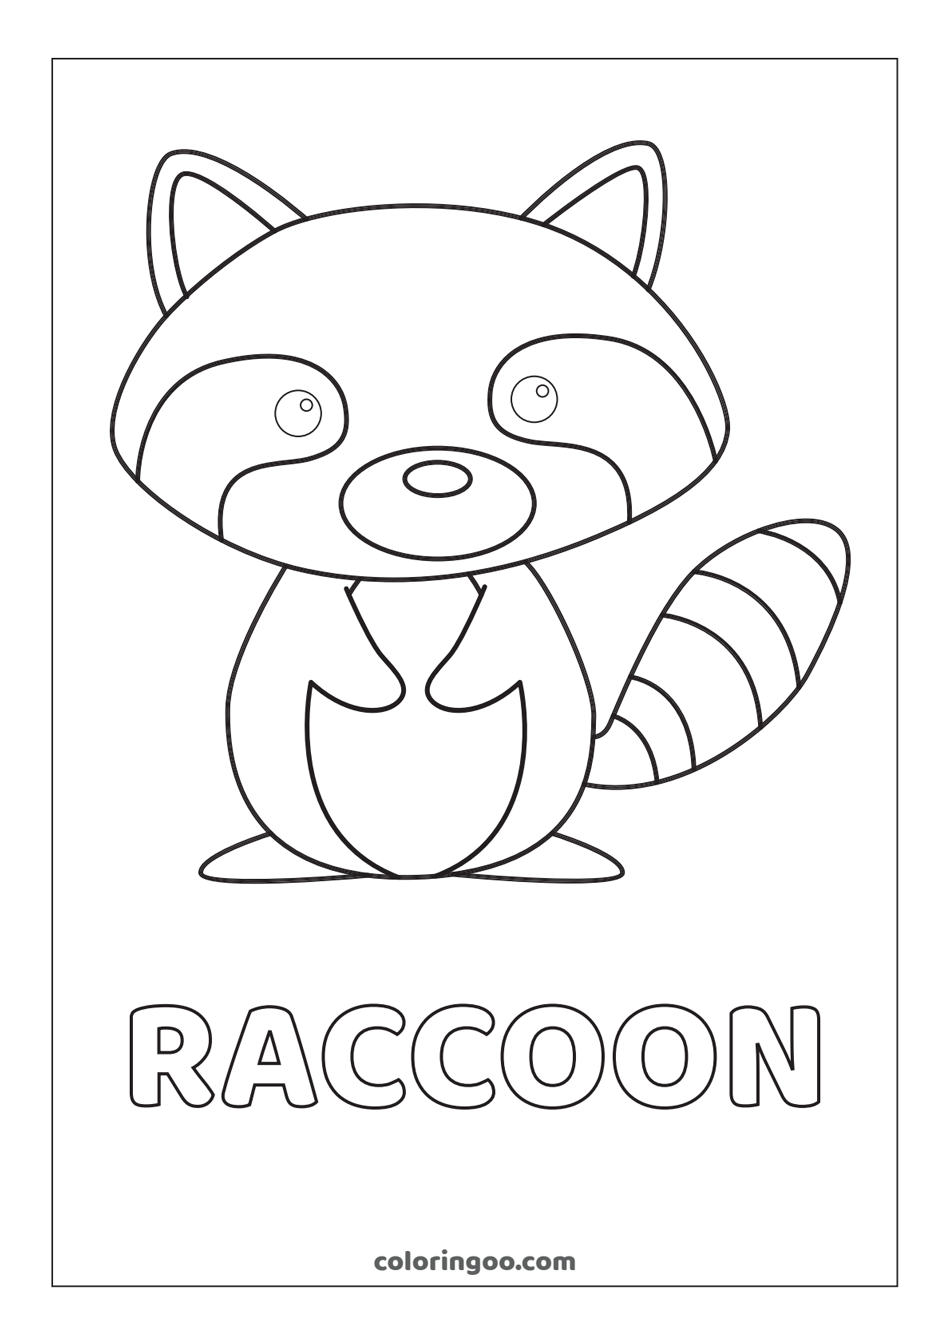 raccoon printable coloring pages for kids